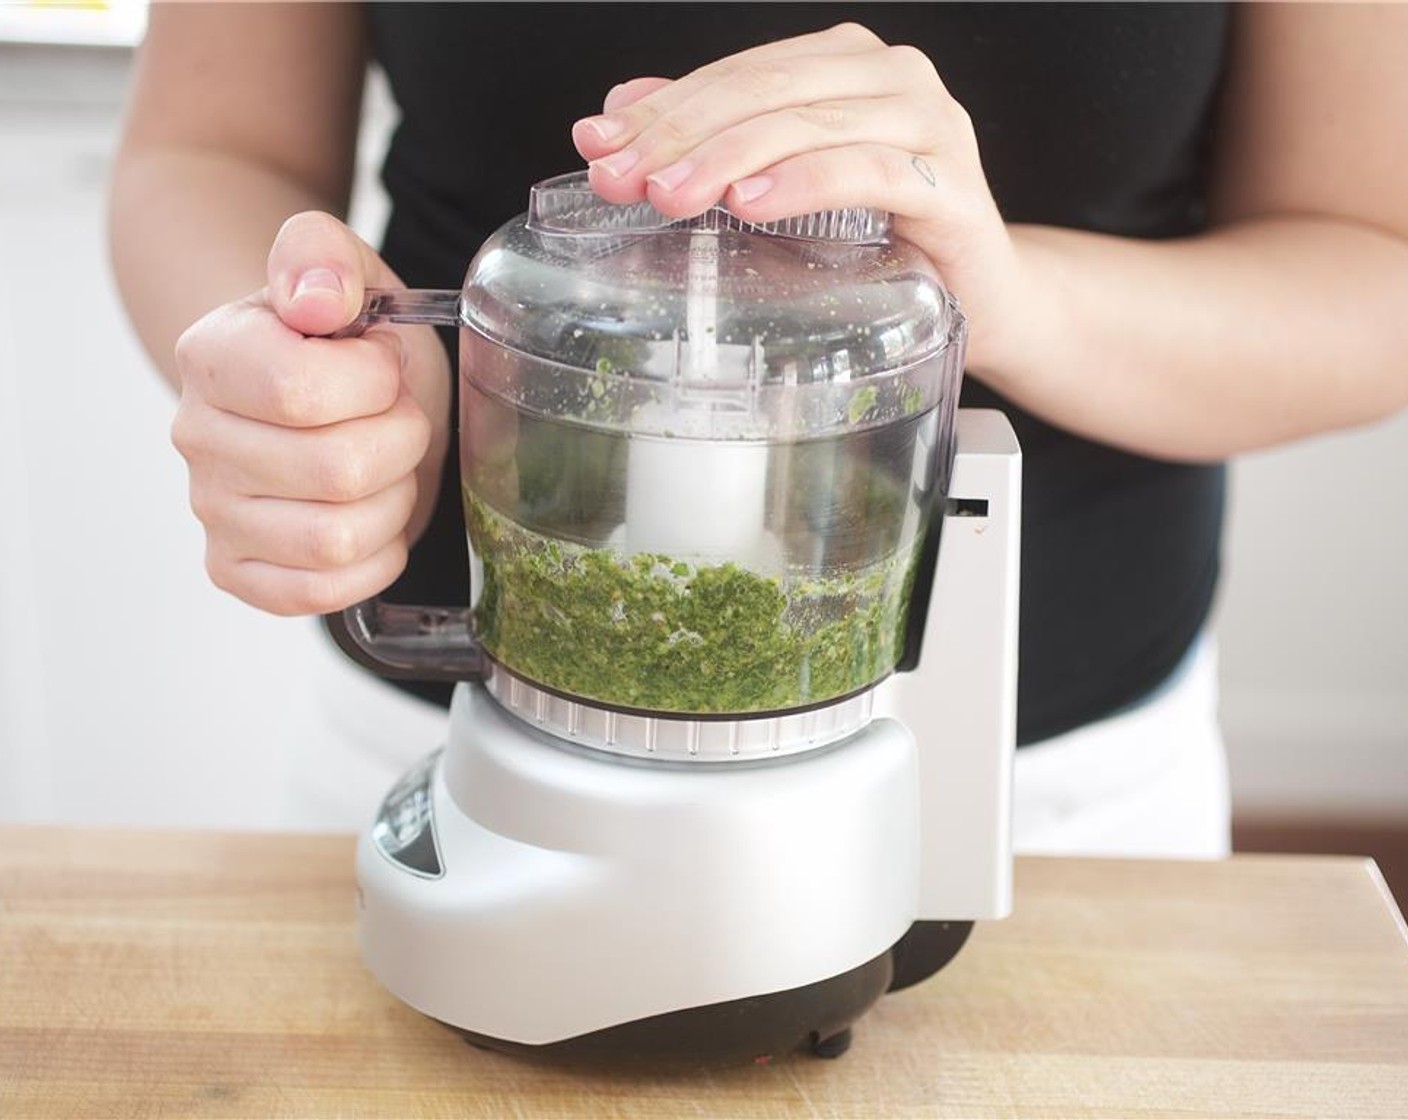 step 7 To create the pesto, pour Olive Oil (1/4 cup), basil leaves, half of the Pine Nuts (2 Tbsp), the last clove of Garlic (1 clove), one tablespoon of Parmesan Cheese (2 Tbsp), Salt (1/2 tsp), and Ground Black Pepper (1/2 tsp) into the bowl of a food processor.